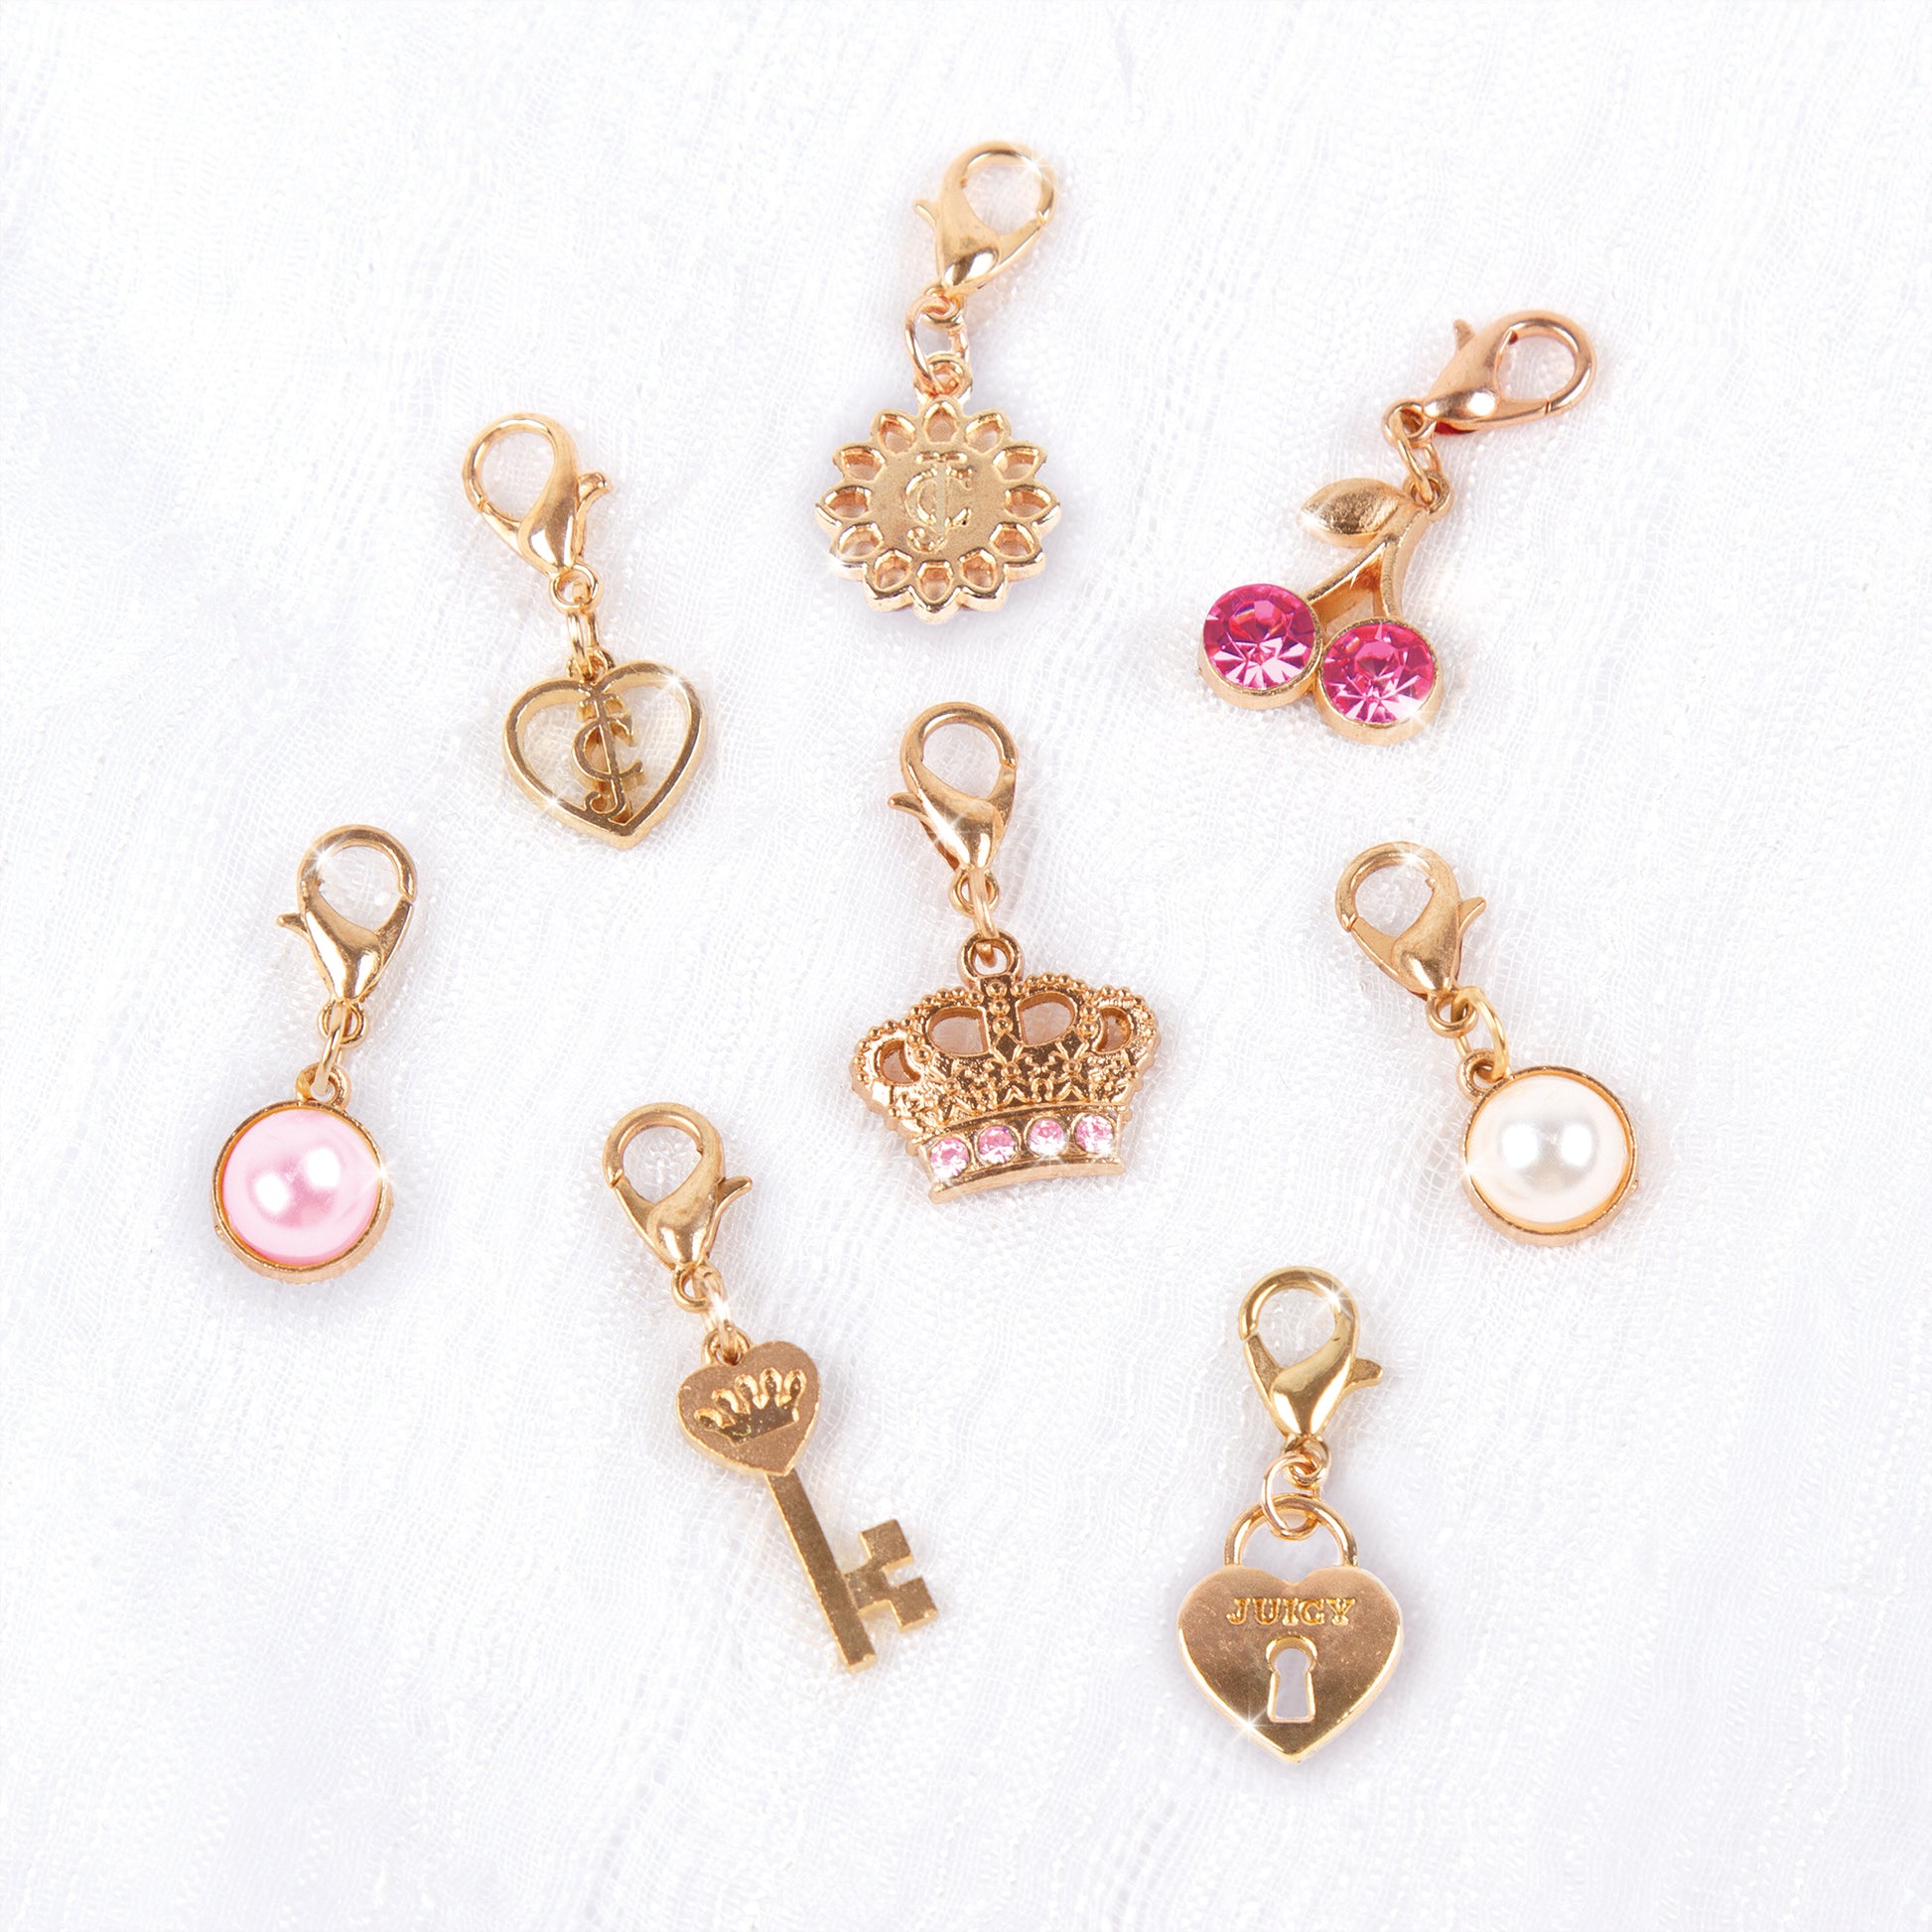 Juicy Couture Jewelry | Juicy Couture Bracelet w/ 17 Charms | Color: Gold/Pink | Size: Os | Pm-26013724's Closet